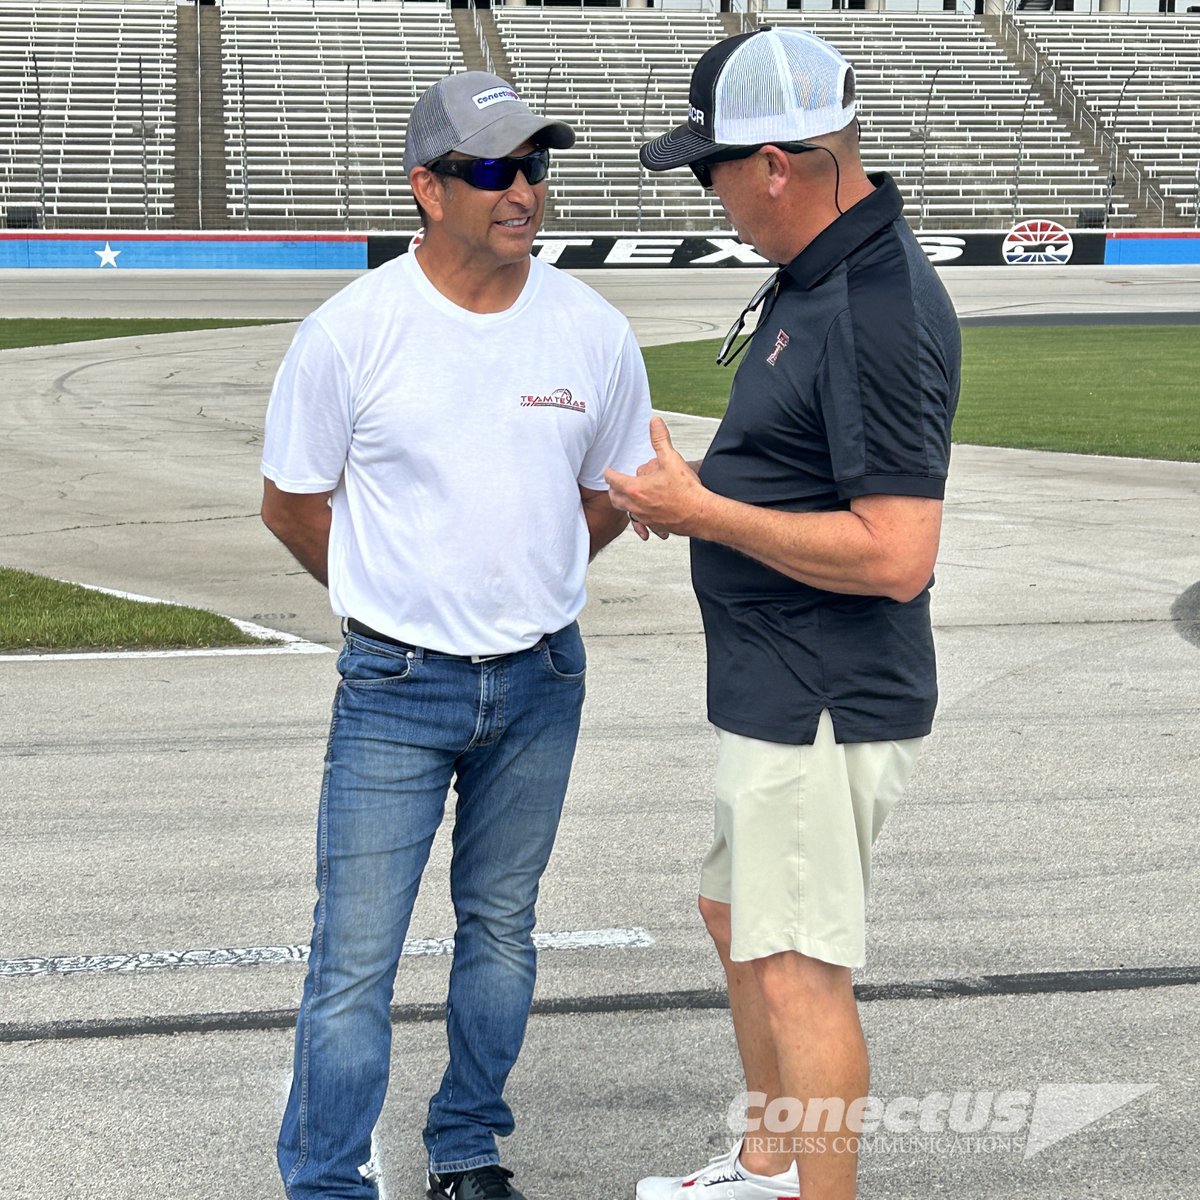 ConectUS Wireless had the privilege to spend the day with SCR General Contractors and their partners at the Team Texas Racing School for a day of racing fun! While we were there, we created social media content and taught them the basics of the wireless industry!